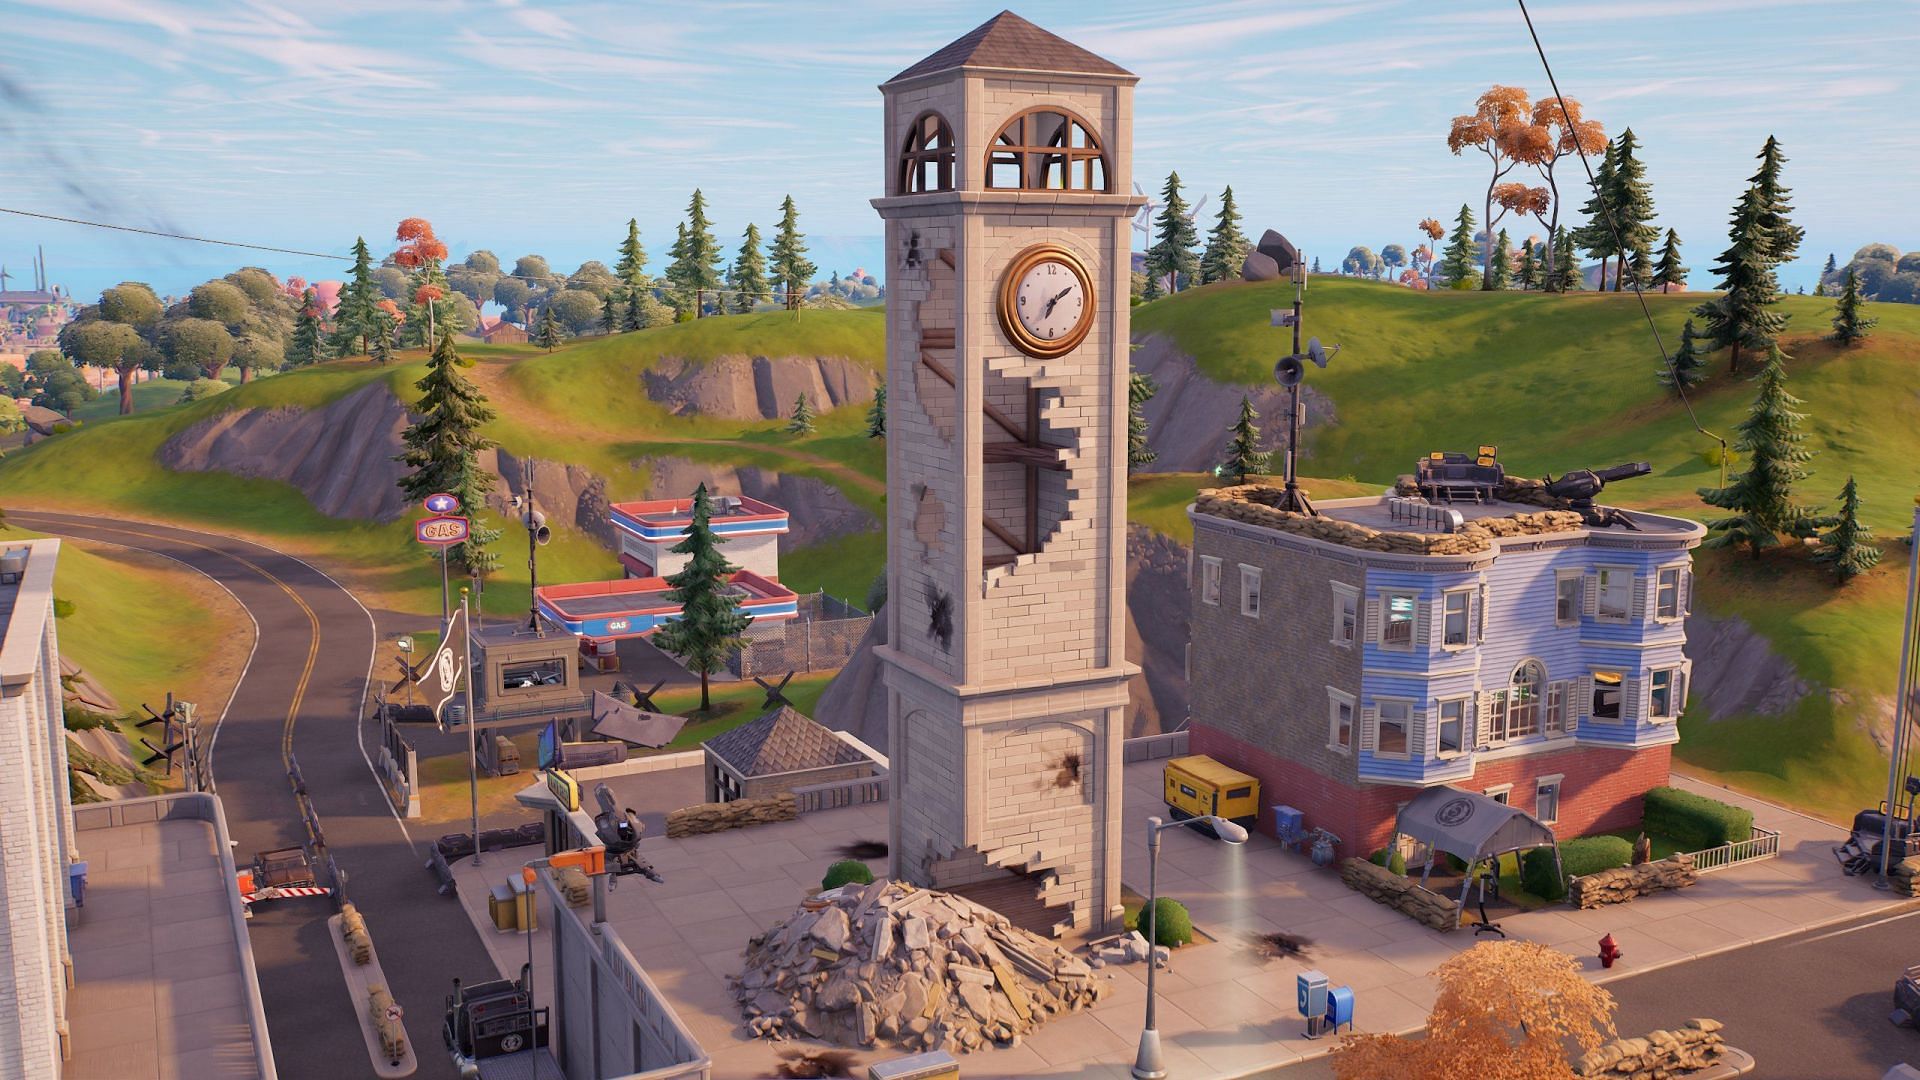 Tilted Towers will be obliterated entirely in Fortnite Chapter 3 Season 2 (Image via Sportskeeda)